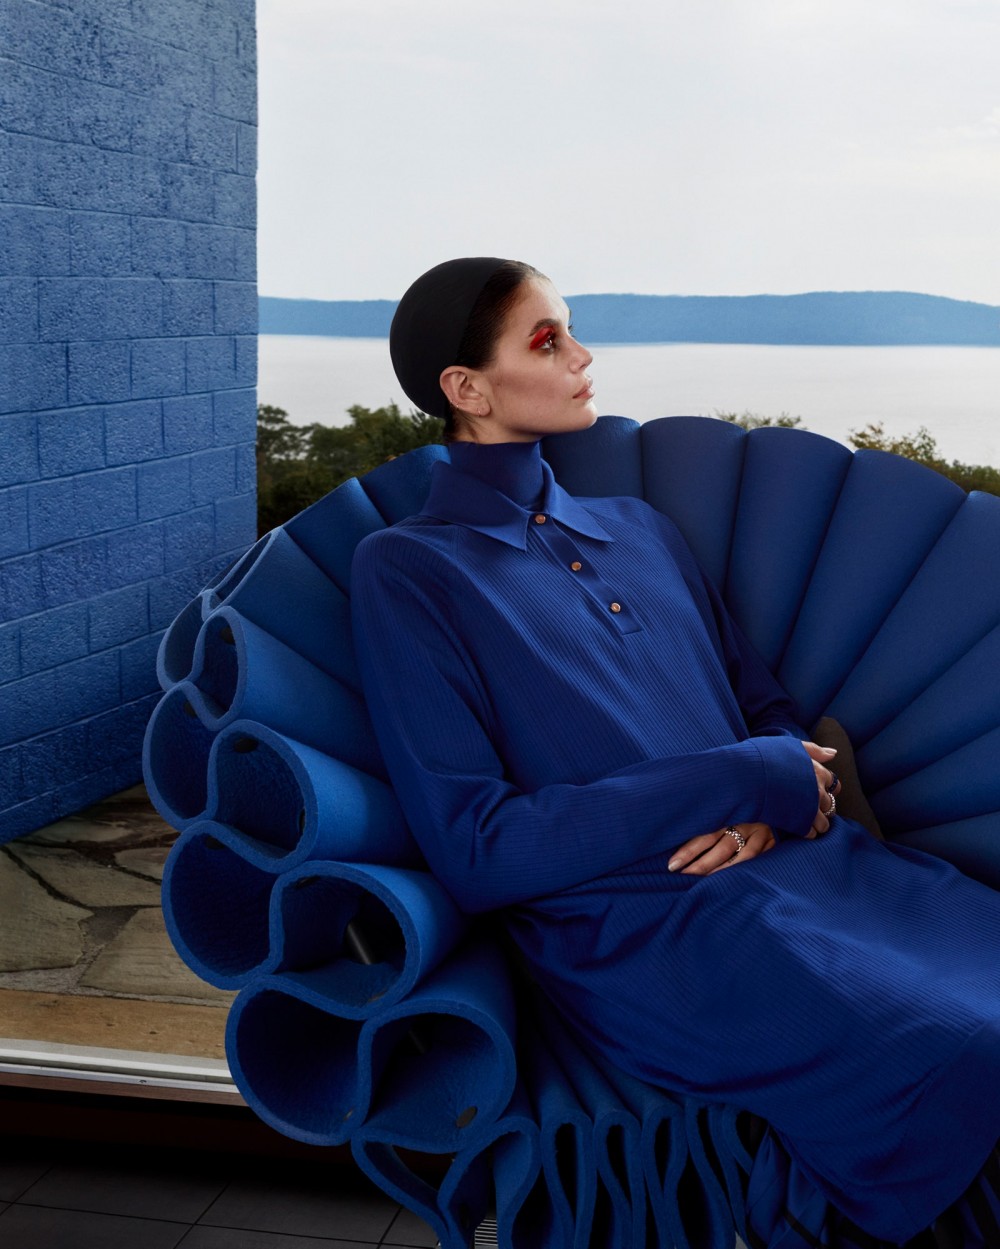 pGerberin an armchair by artist and designer Dror Benshetritholds to the straight and narrow in an Herms cobaltblue polo...